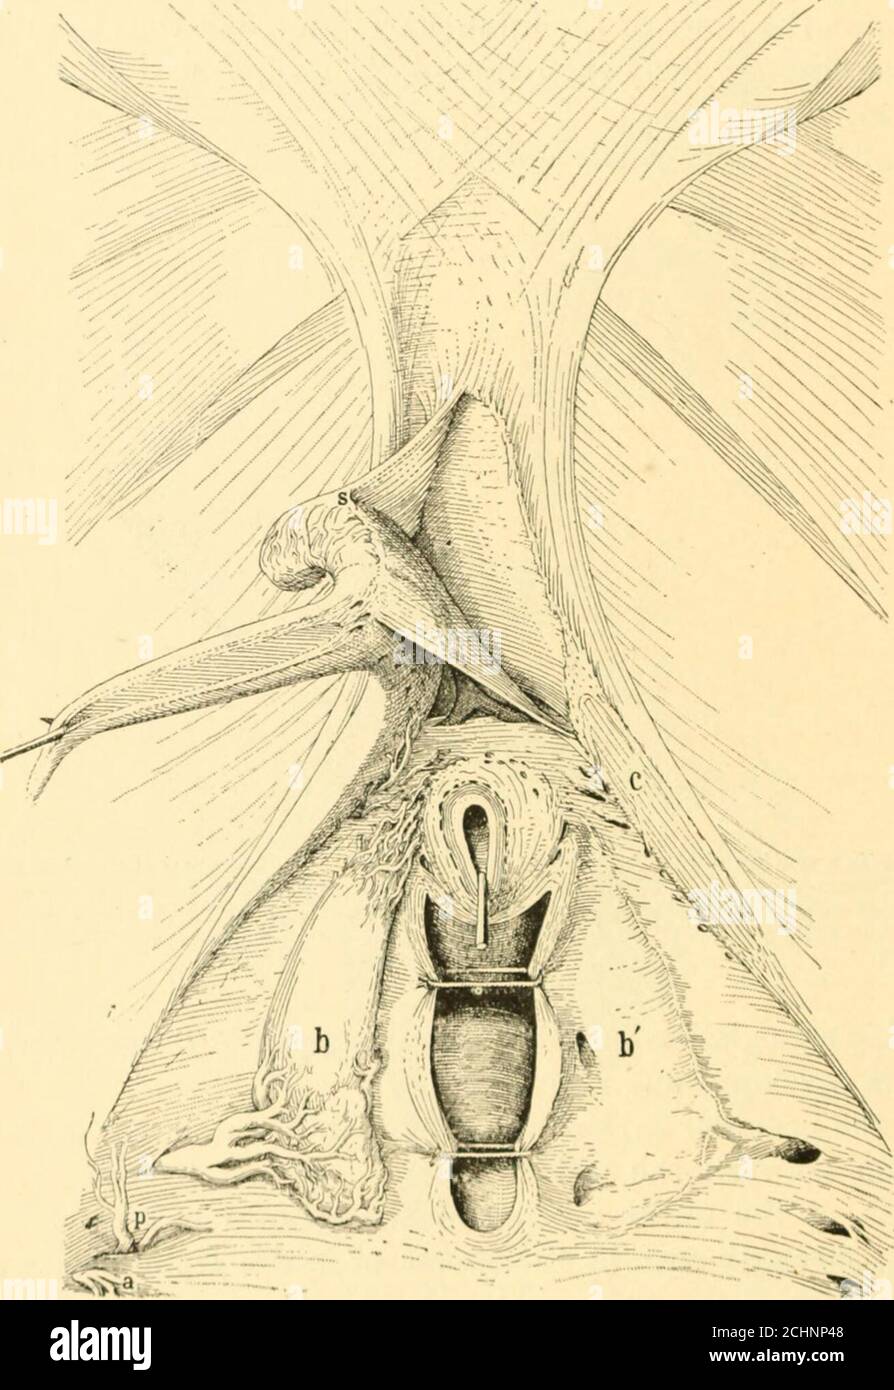 . The science and art of midwifery . ccess of fibers from distant sources,as, for instance, from those which border the pubic crests. Below,beneath the pubic arch, it forms the ligamentum arcuatum. Ante-riorly the symphysis is increased in thickness by the accession of a vastnumber of tendinous elements which intercross at the median line. When an incision is made through the adipose tissue of the monsveneris, and the divided surfaces are drawn well apart, the operatorexposes laterally the attachments of the muscles of the thigh to thebony ridges which border the symphyseal space. Overlying th Stock Photo